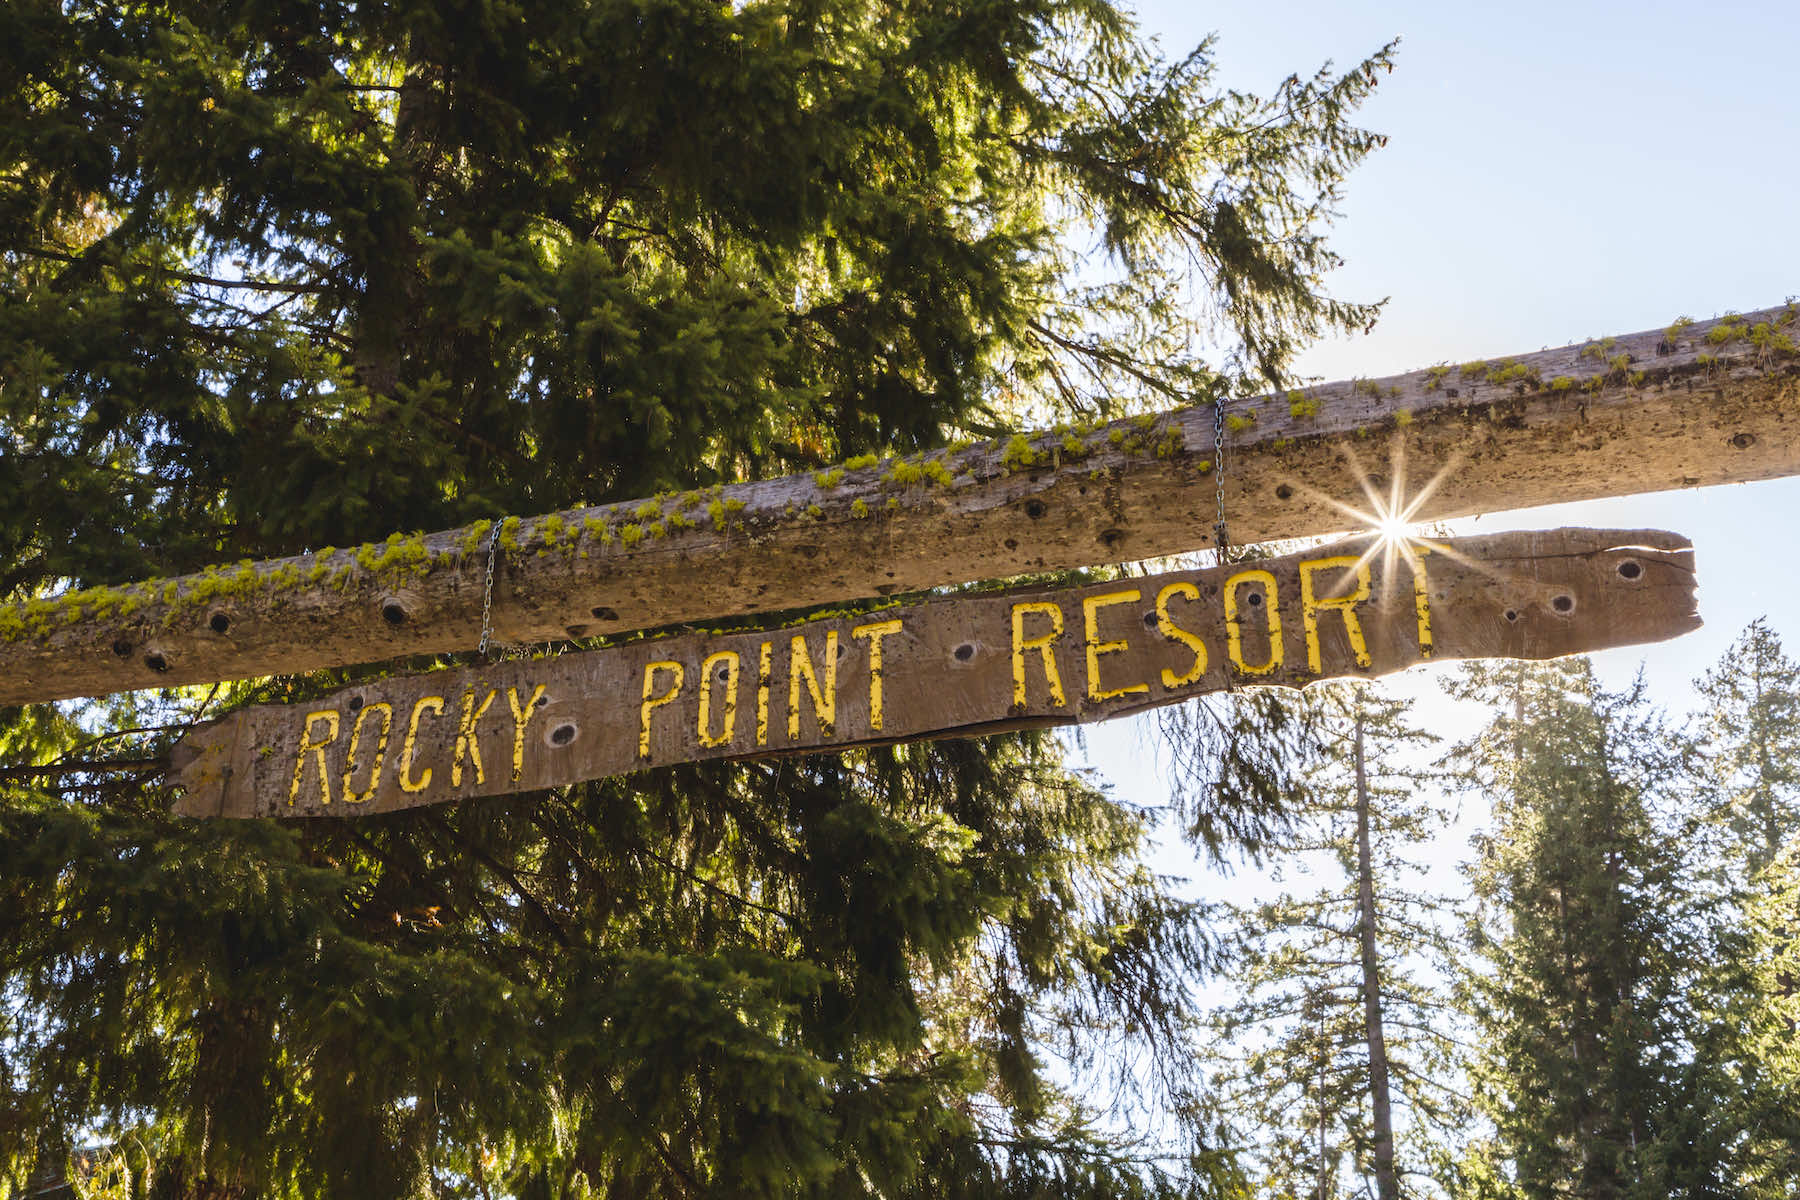 Rustic Rocky Point Resort sign.